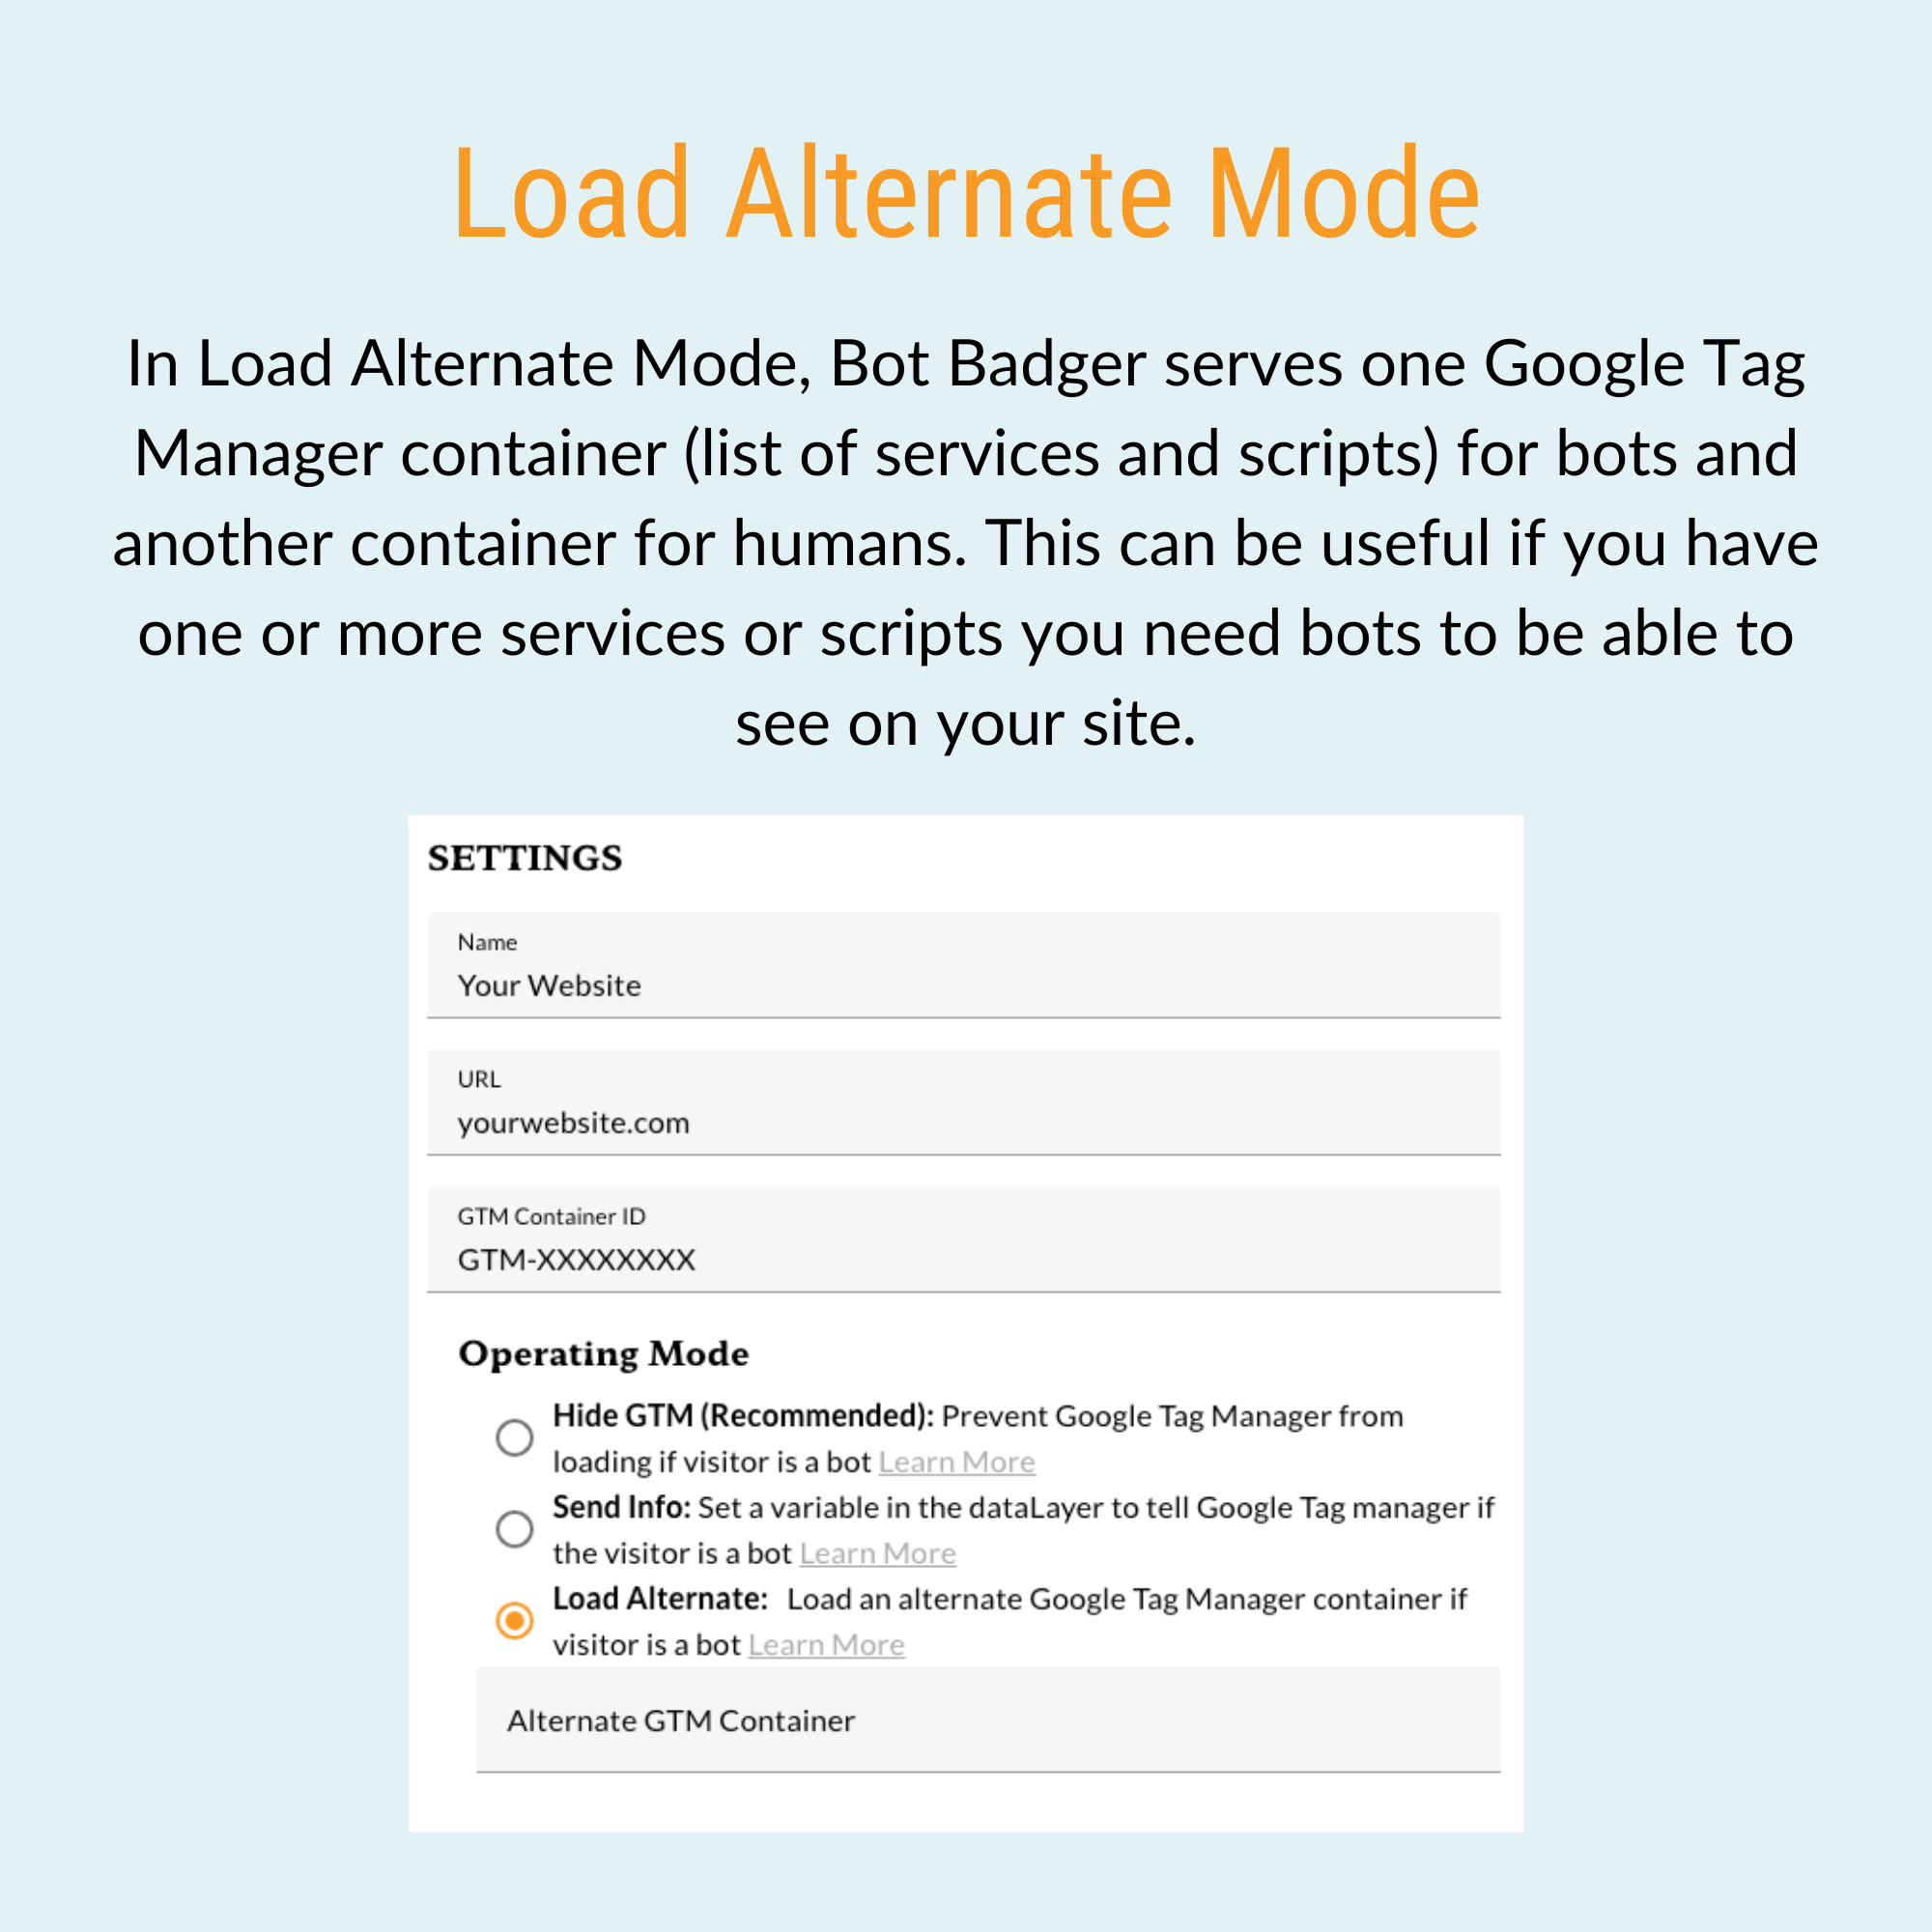 In Load Alternate Mode, Bot Badger delivers different Google Tag Manager containers to bots and humans, optimizing site interactions for both by tailoring the visible services and scripts.